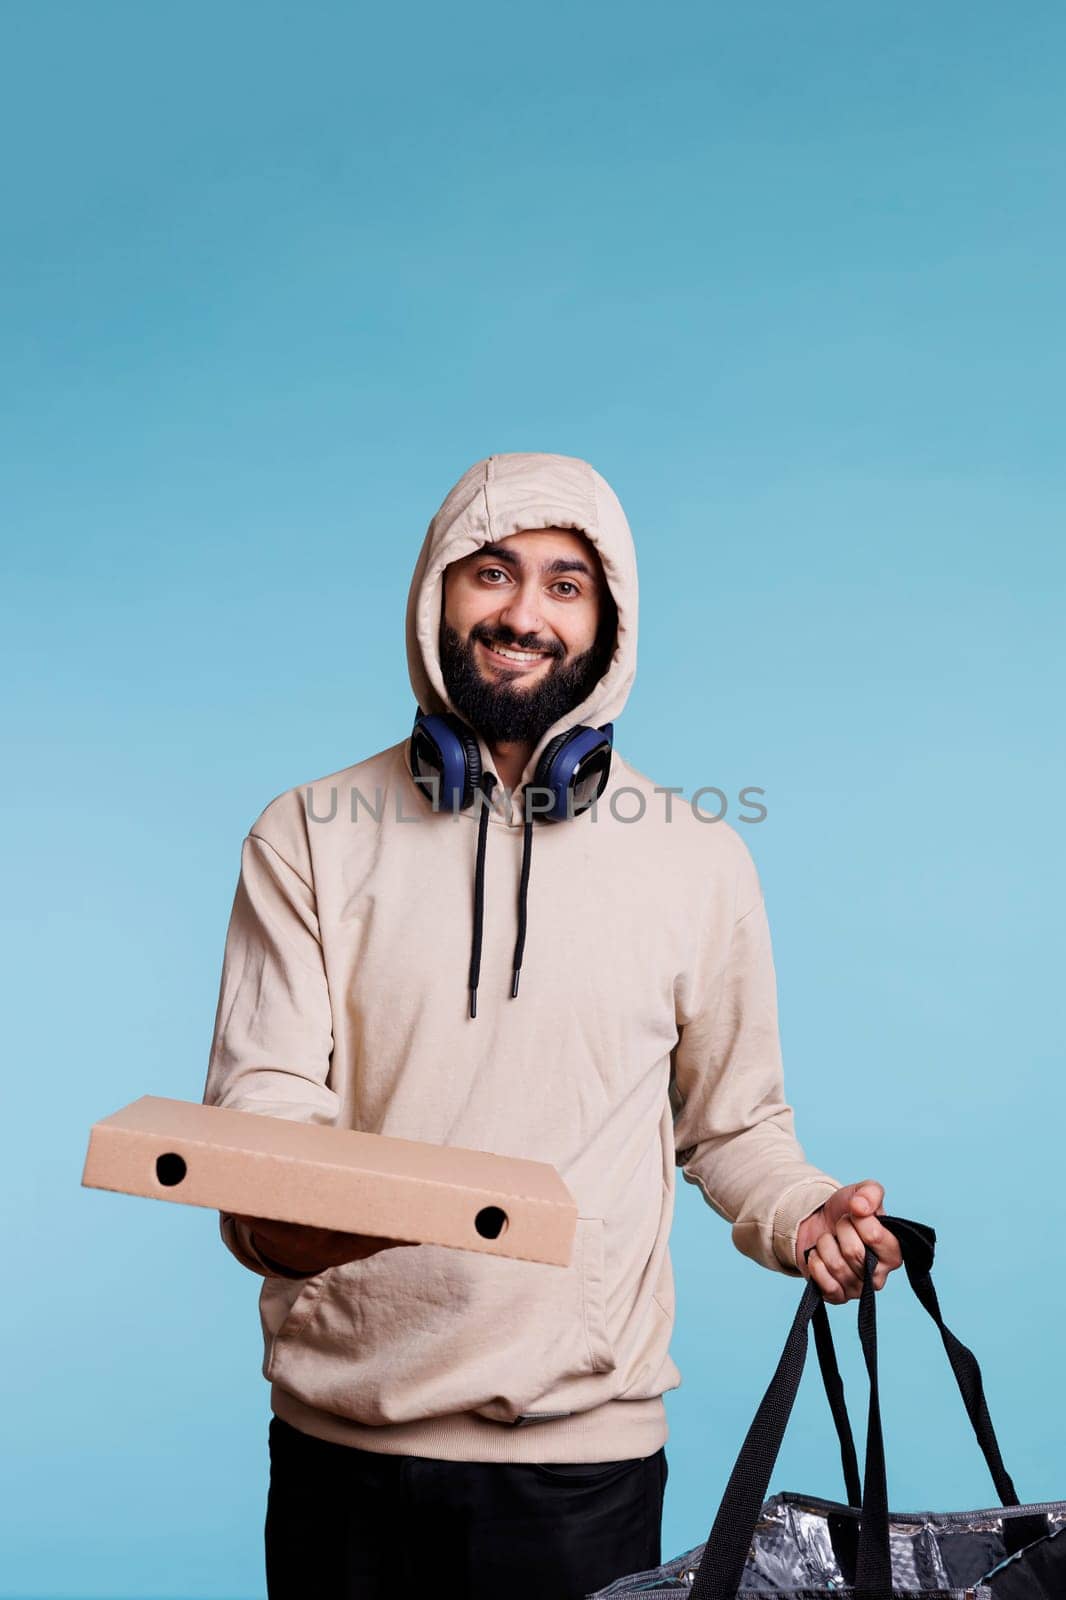 Food delivery courier holding pizza box by DCStudio